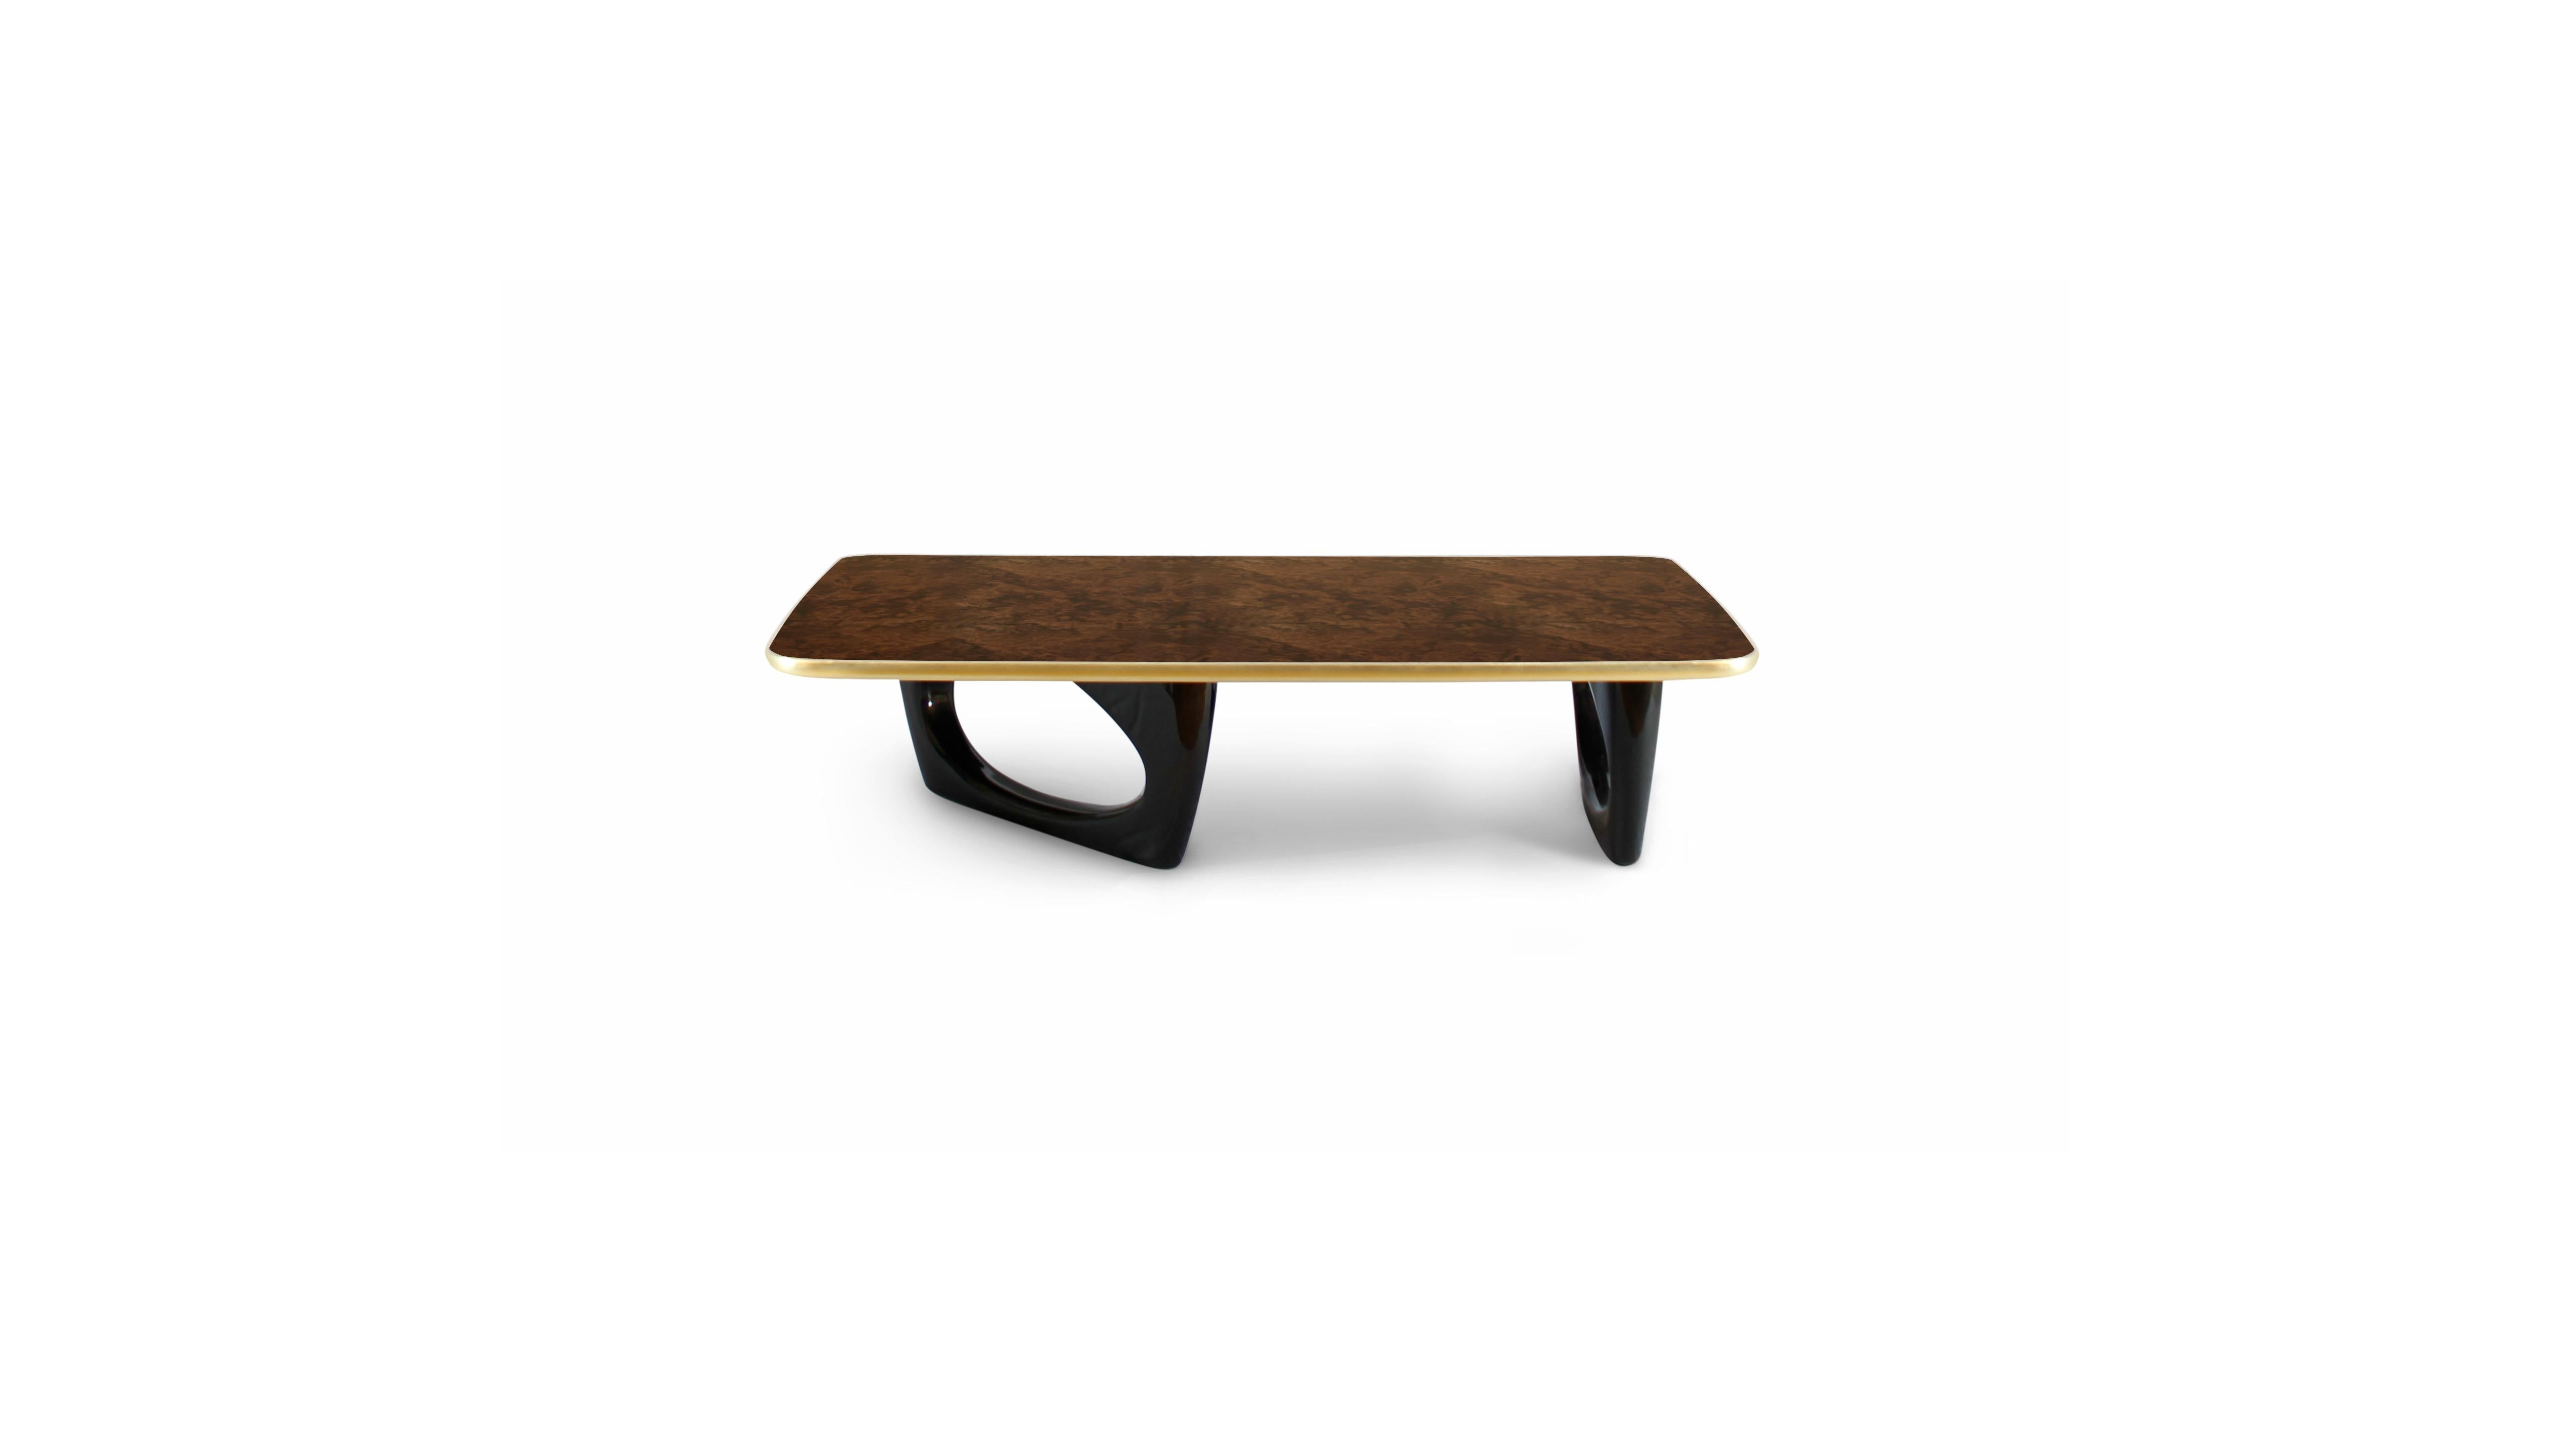 From the legend of Robin Hood arises Sherwood center table. A rectangular coffee table with a base in wood with black lacquer & a top in glossy walnut root veneer with gold leaf frame. This wood coffee table is ideal for Mid-Century Modern